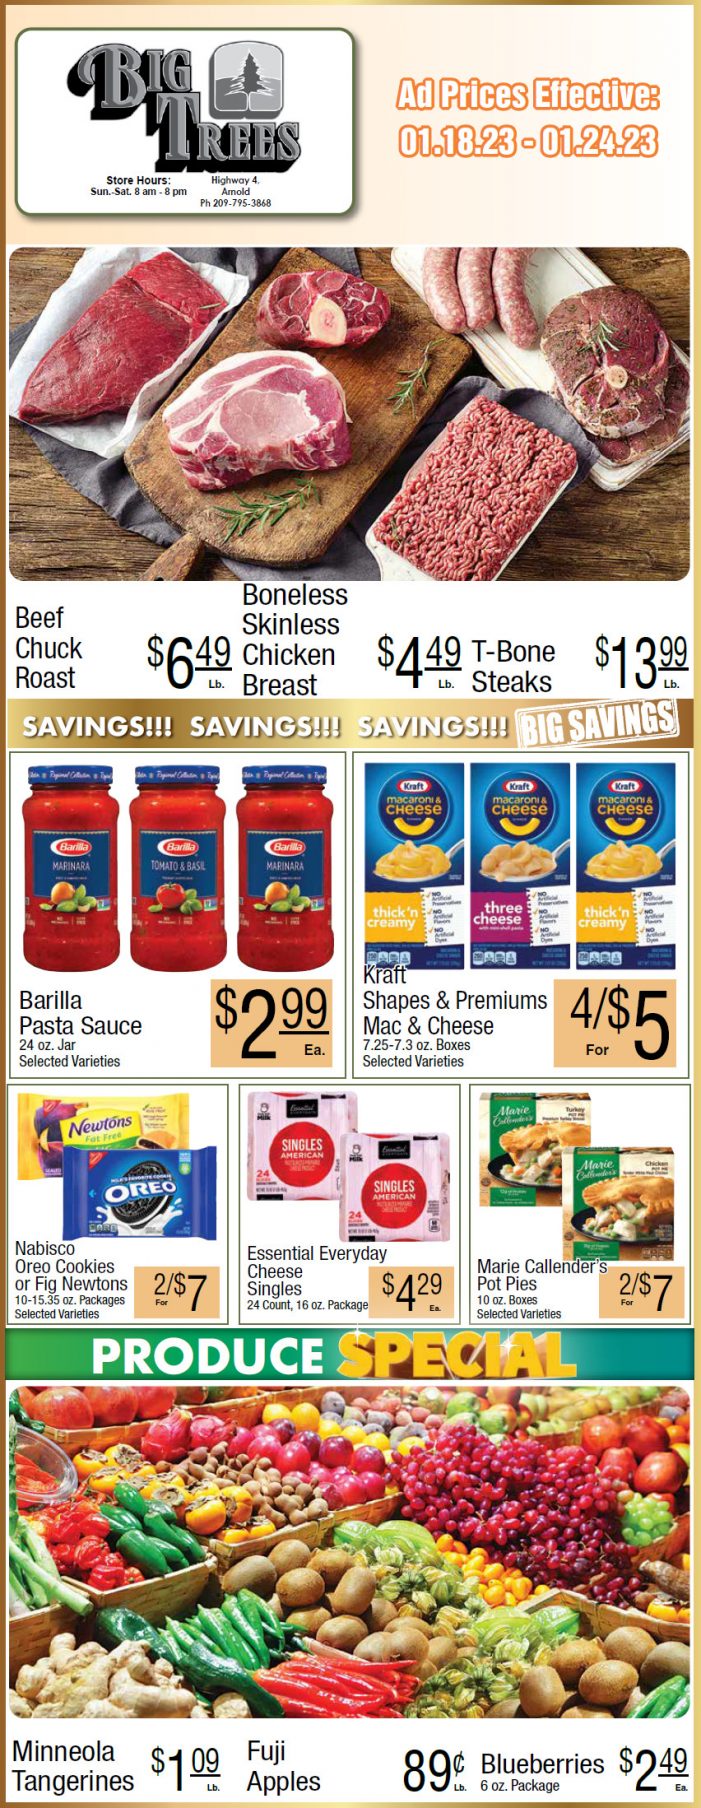 Big Trees Market Weekly Ad & Grocery Specials January 18 – 24th!  Shop Local & Save!!